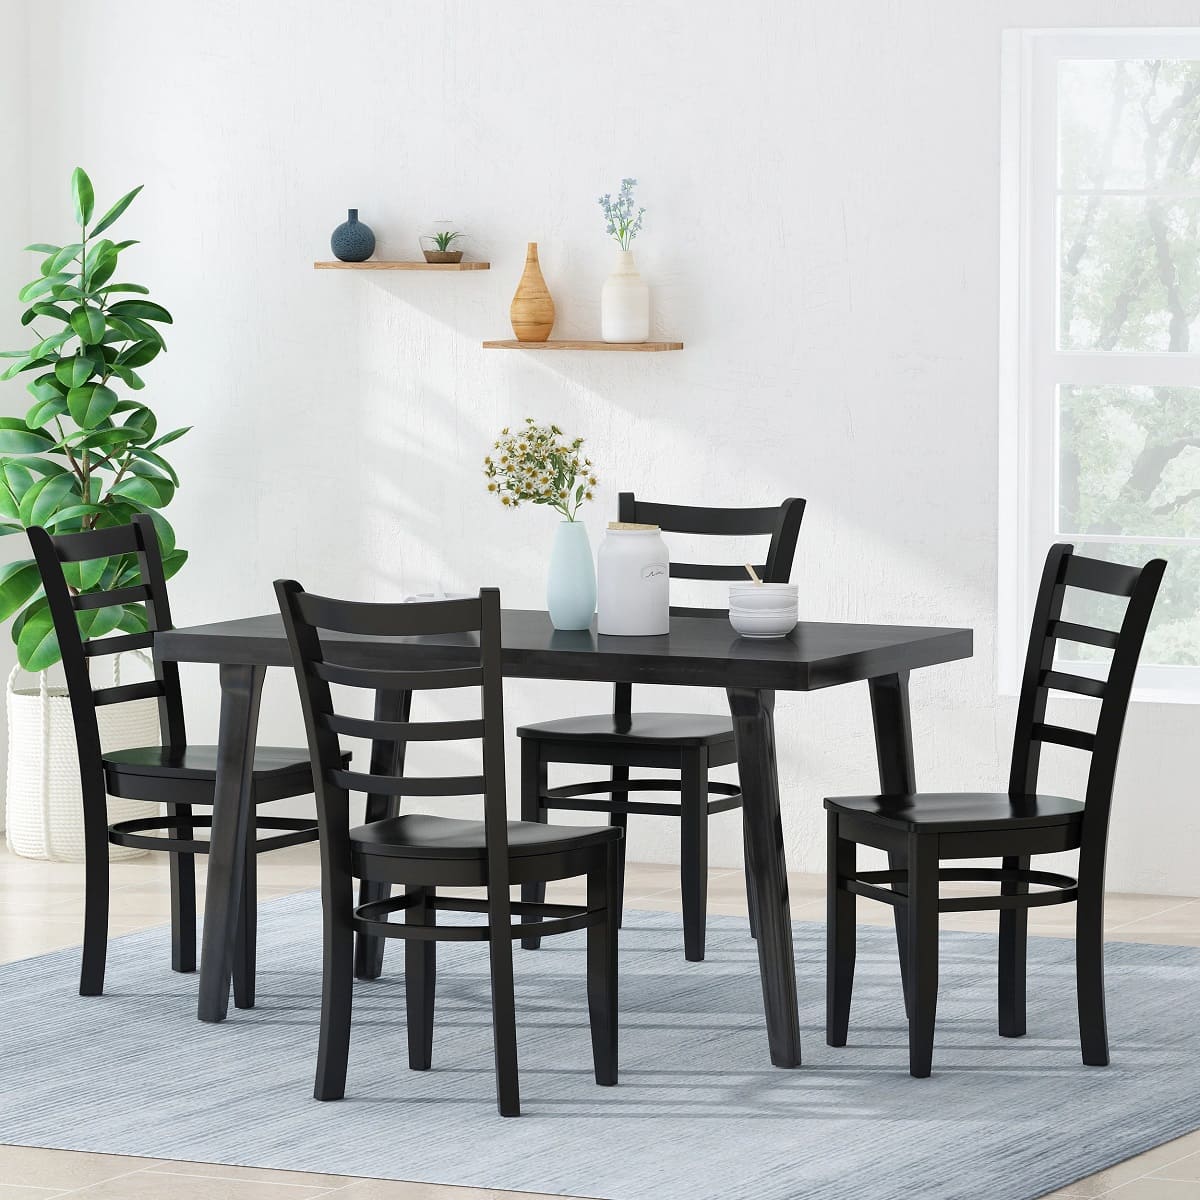 How To Build Black Dining Chairs